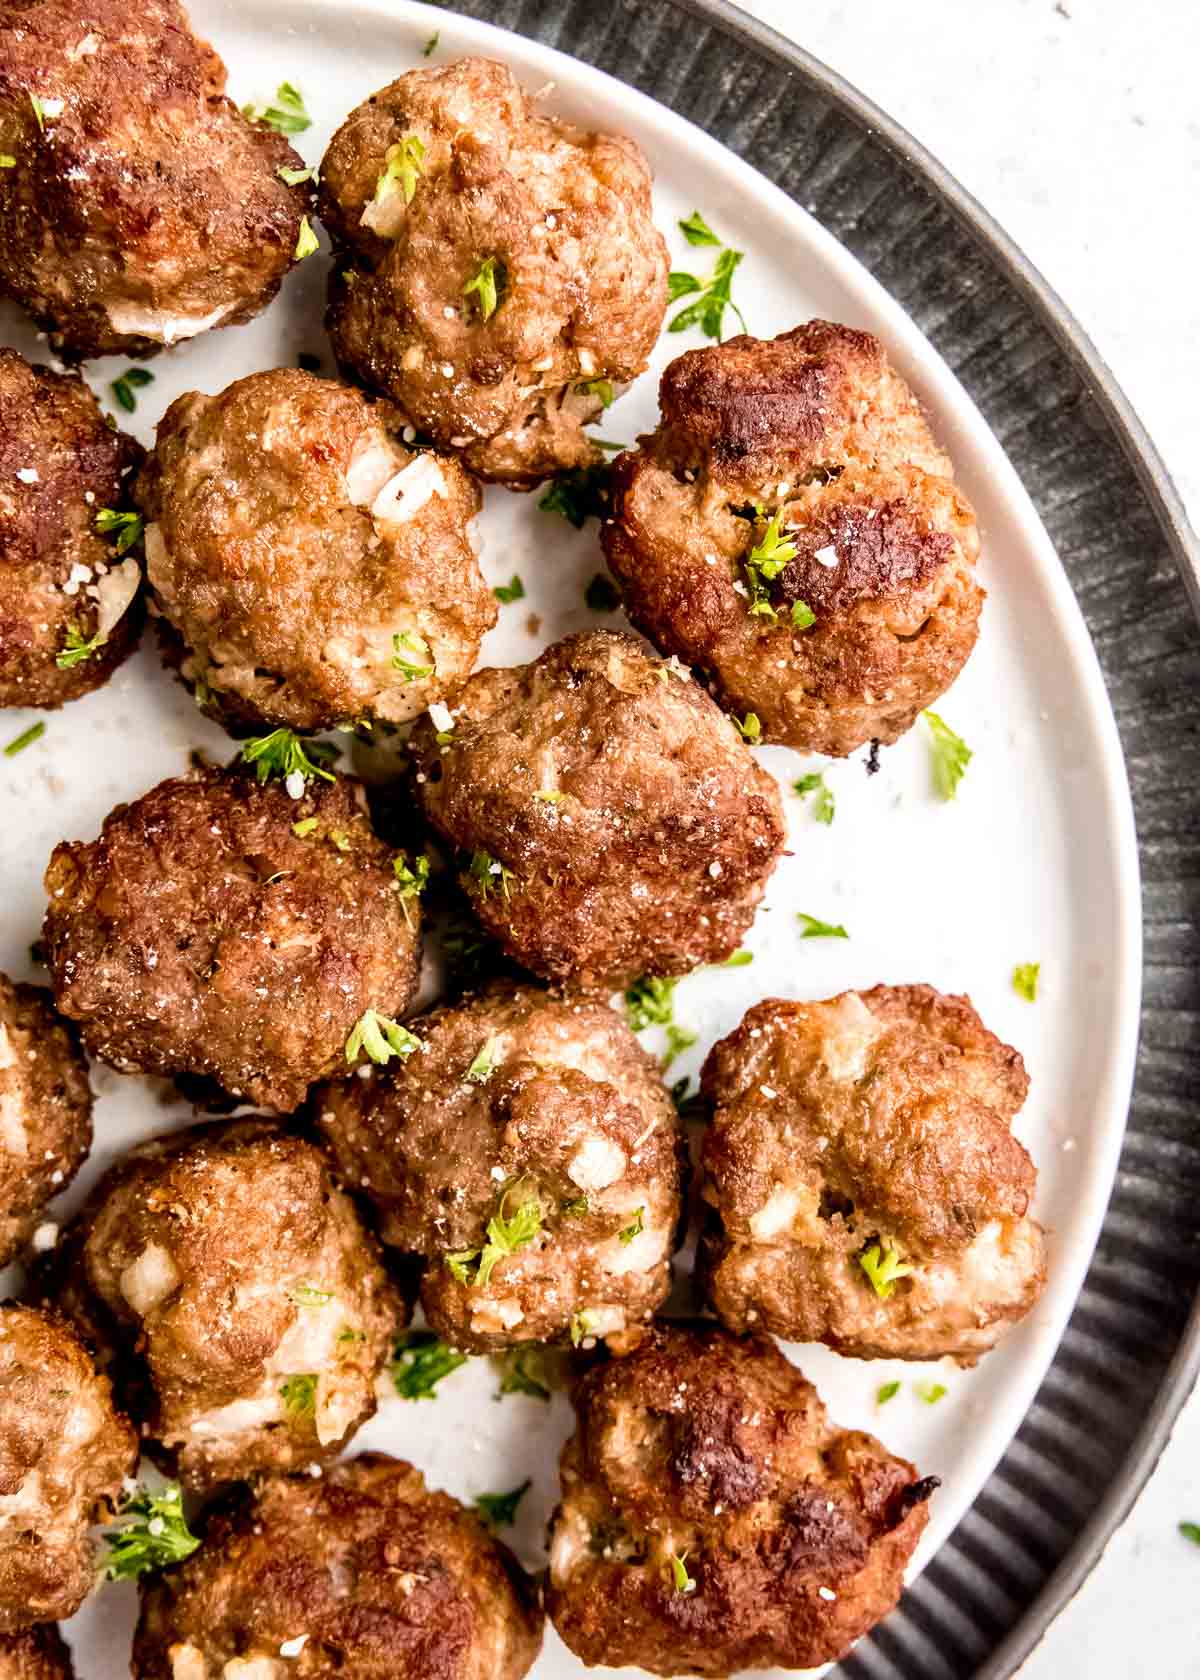 These Classic Air Fryer Meatballs are ready in 20 minutes and SO versatile! Pair this meal prep recipe with your favorite sauce for an easy appetizer or dinner.